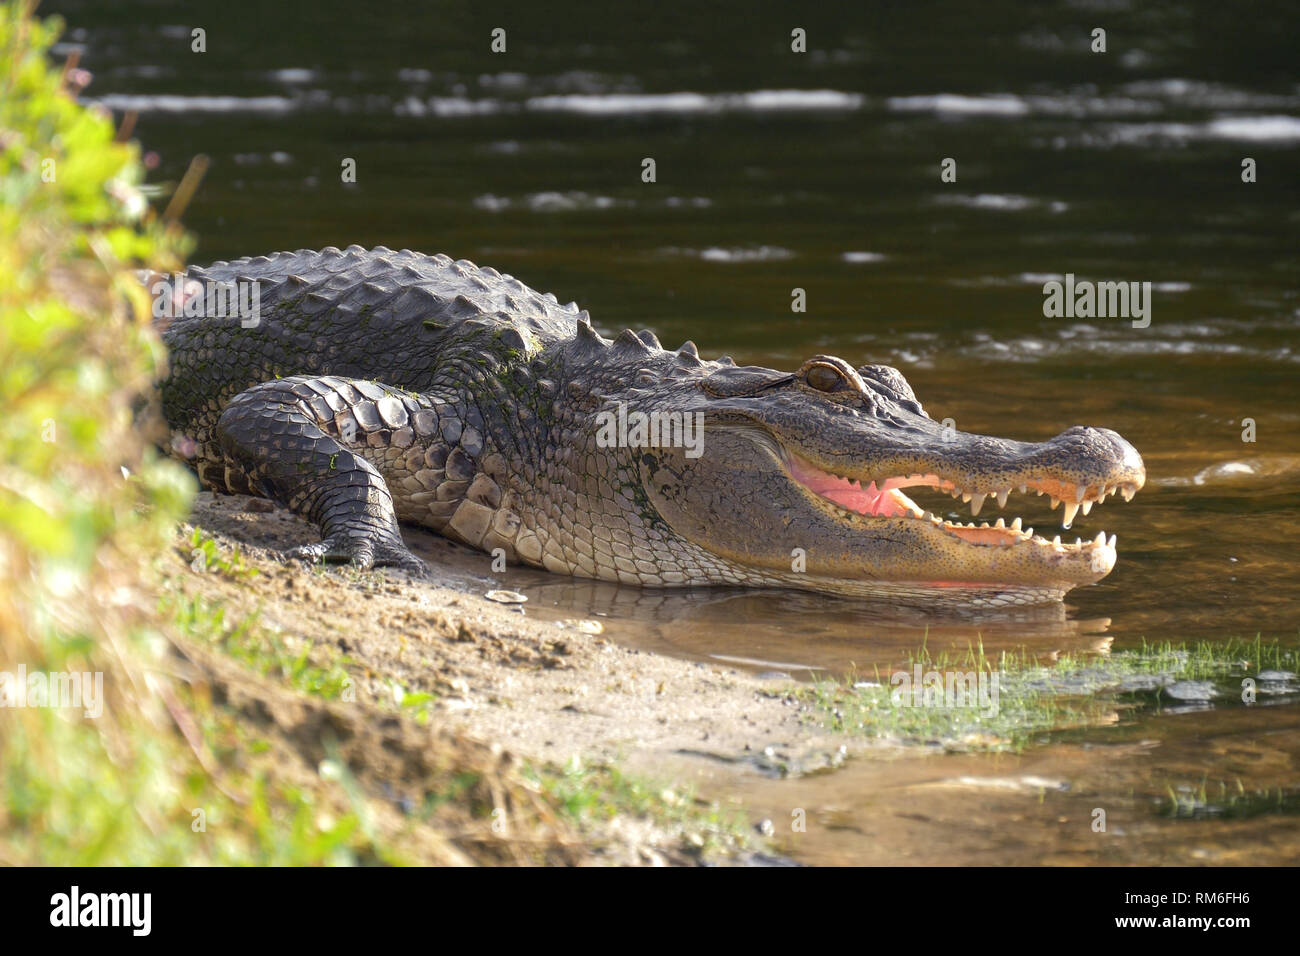 Alligator laying near a pond with its mouth open. Stock Photo